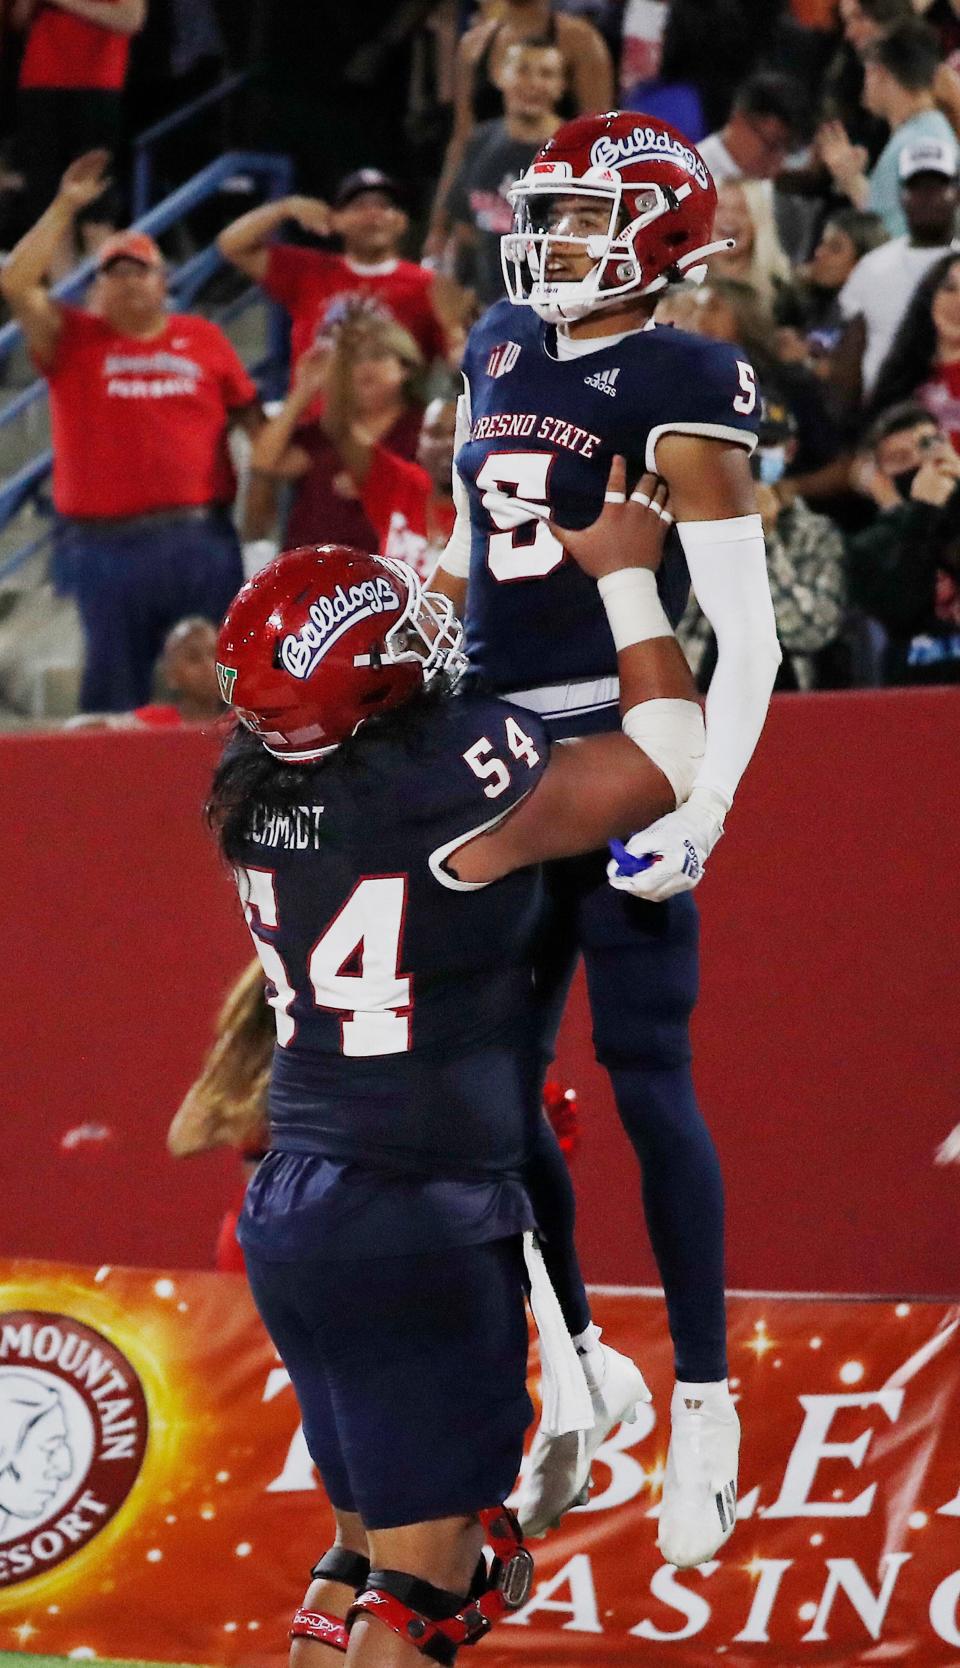 Fresno State offensive lineman Bula Schmidt holds up wide receiver Jalen Cropper after a touchdown against UNLV during the second half of an NCAA college football game in Fresno, Calif., Friday, Sept. 24, 2021.